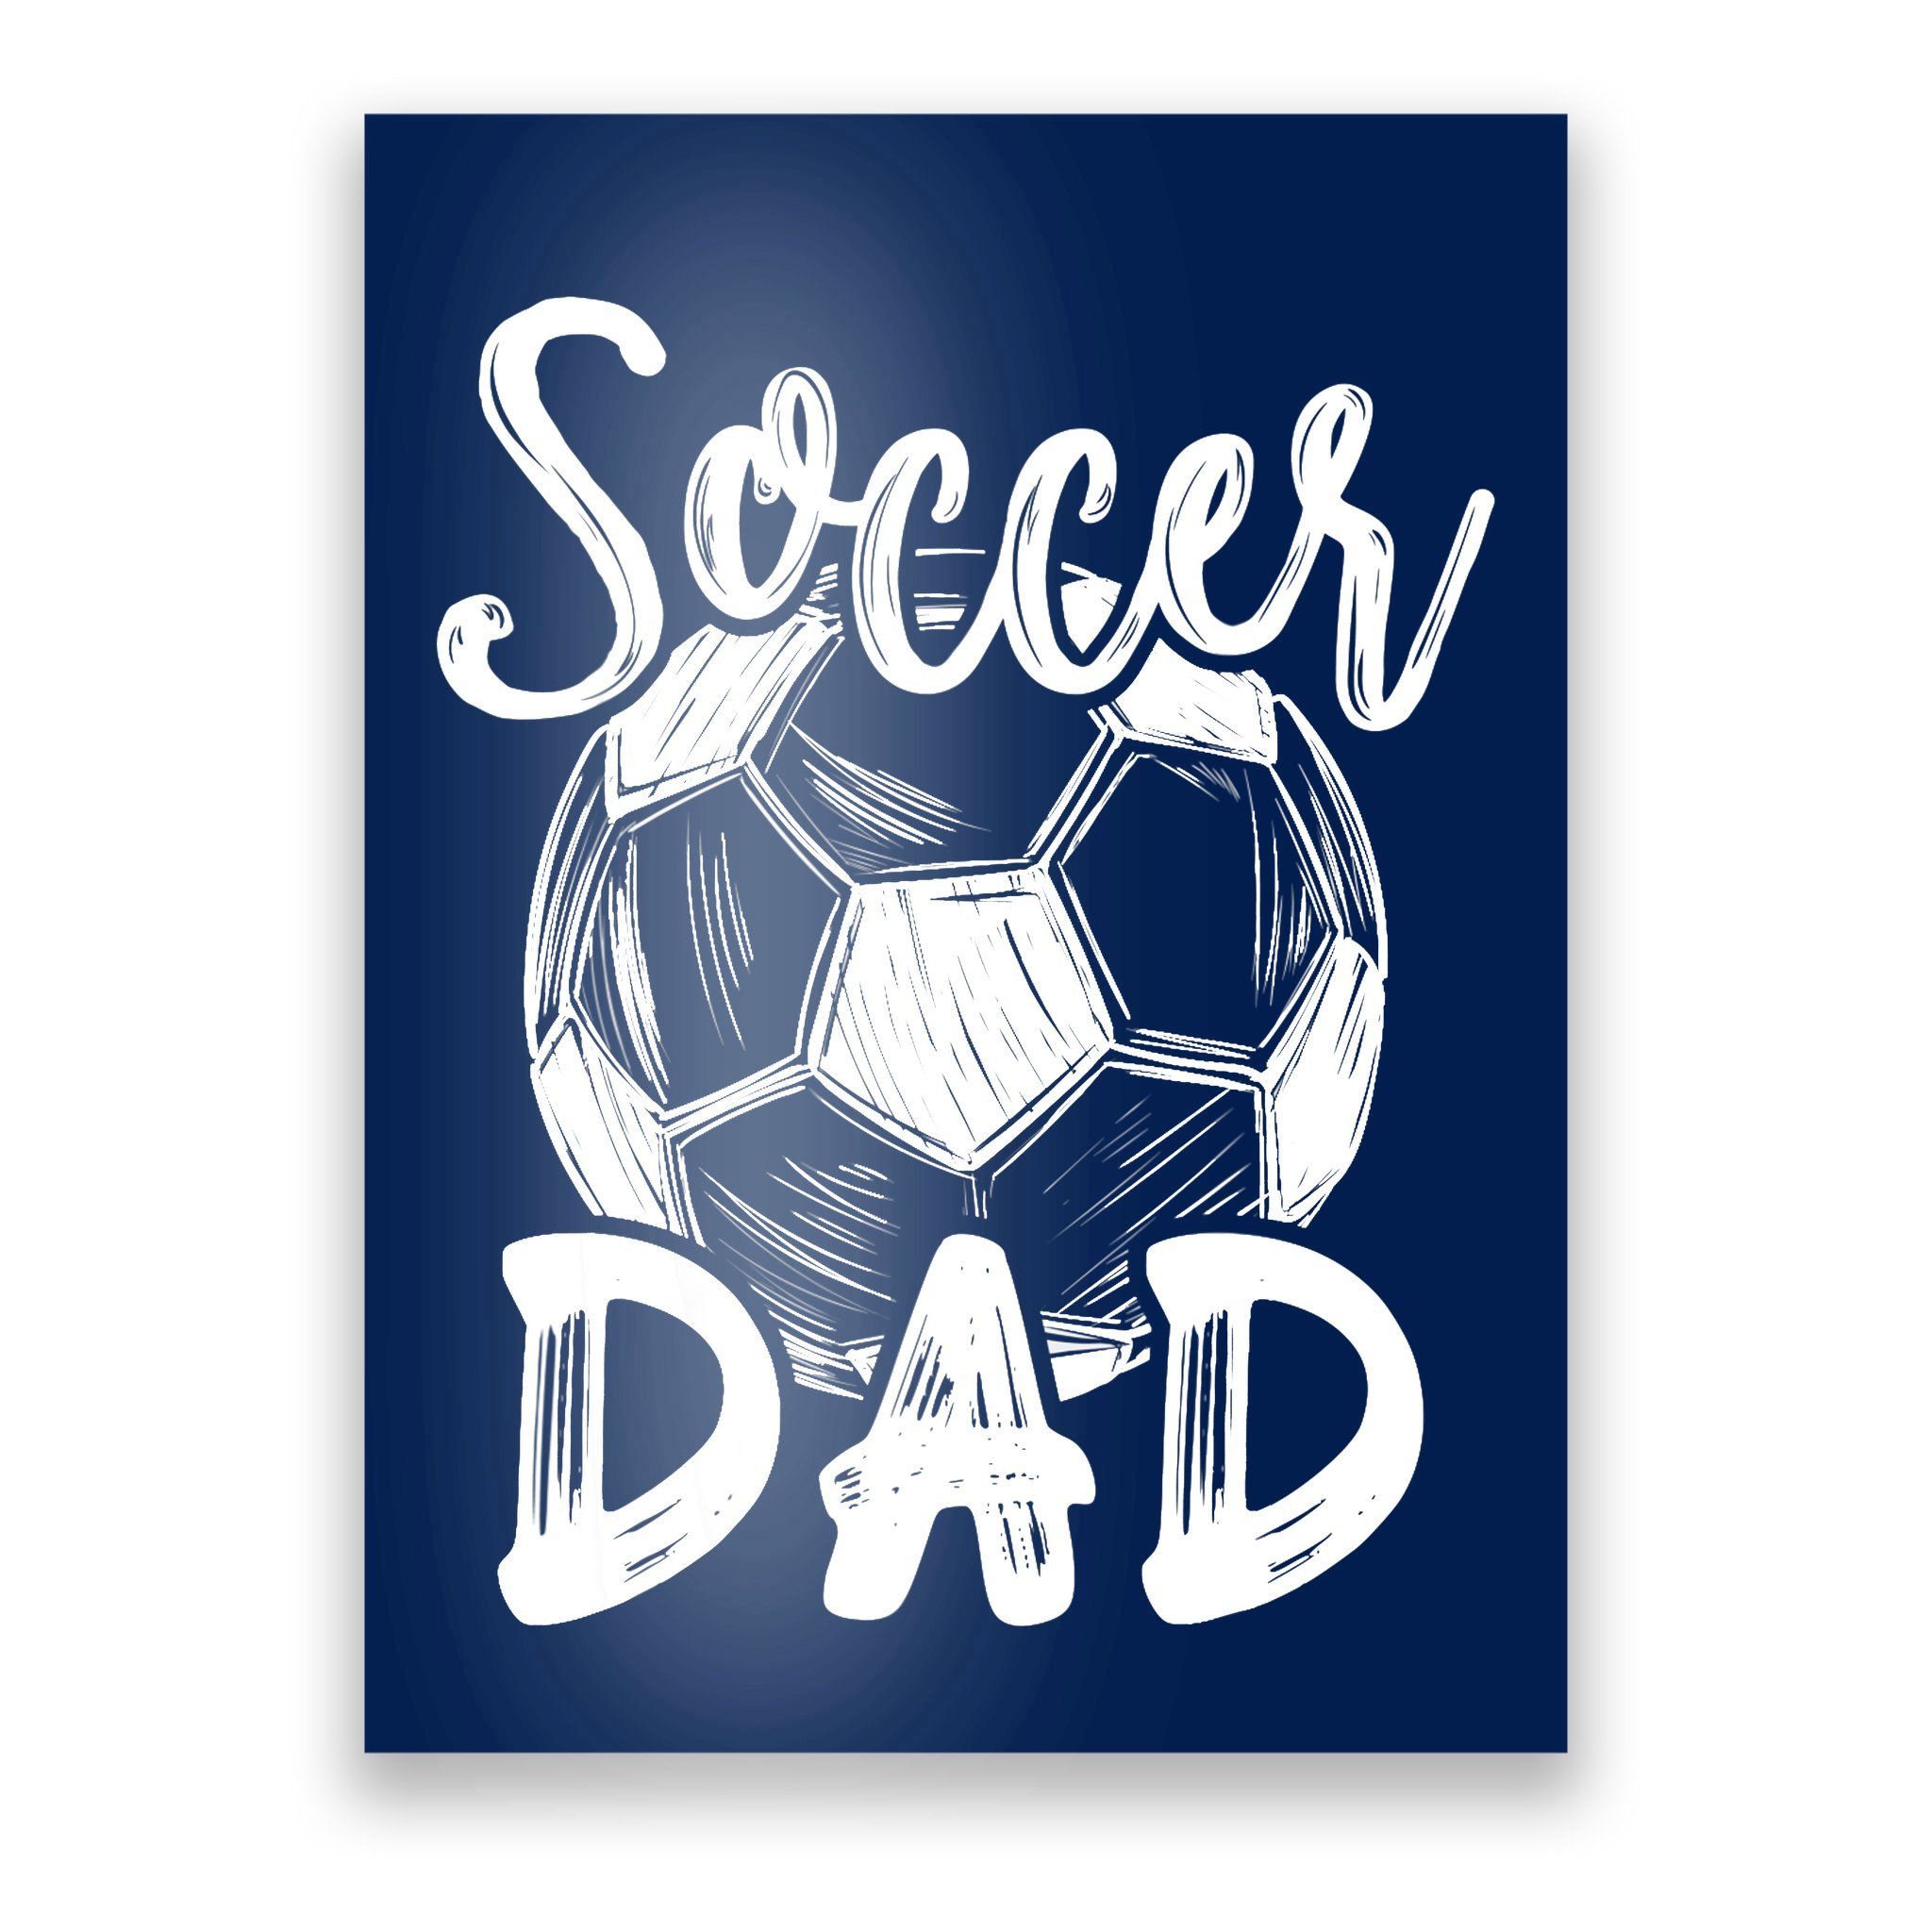 family playing soccer clipart